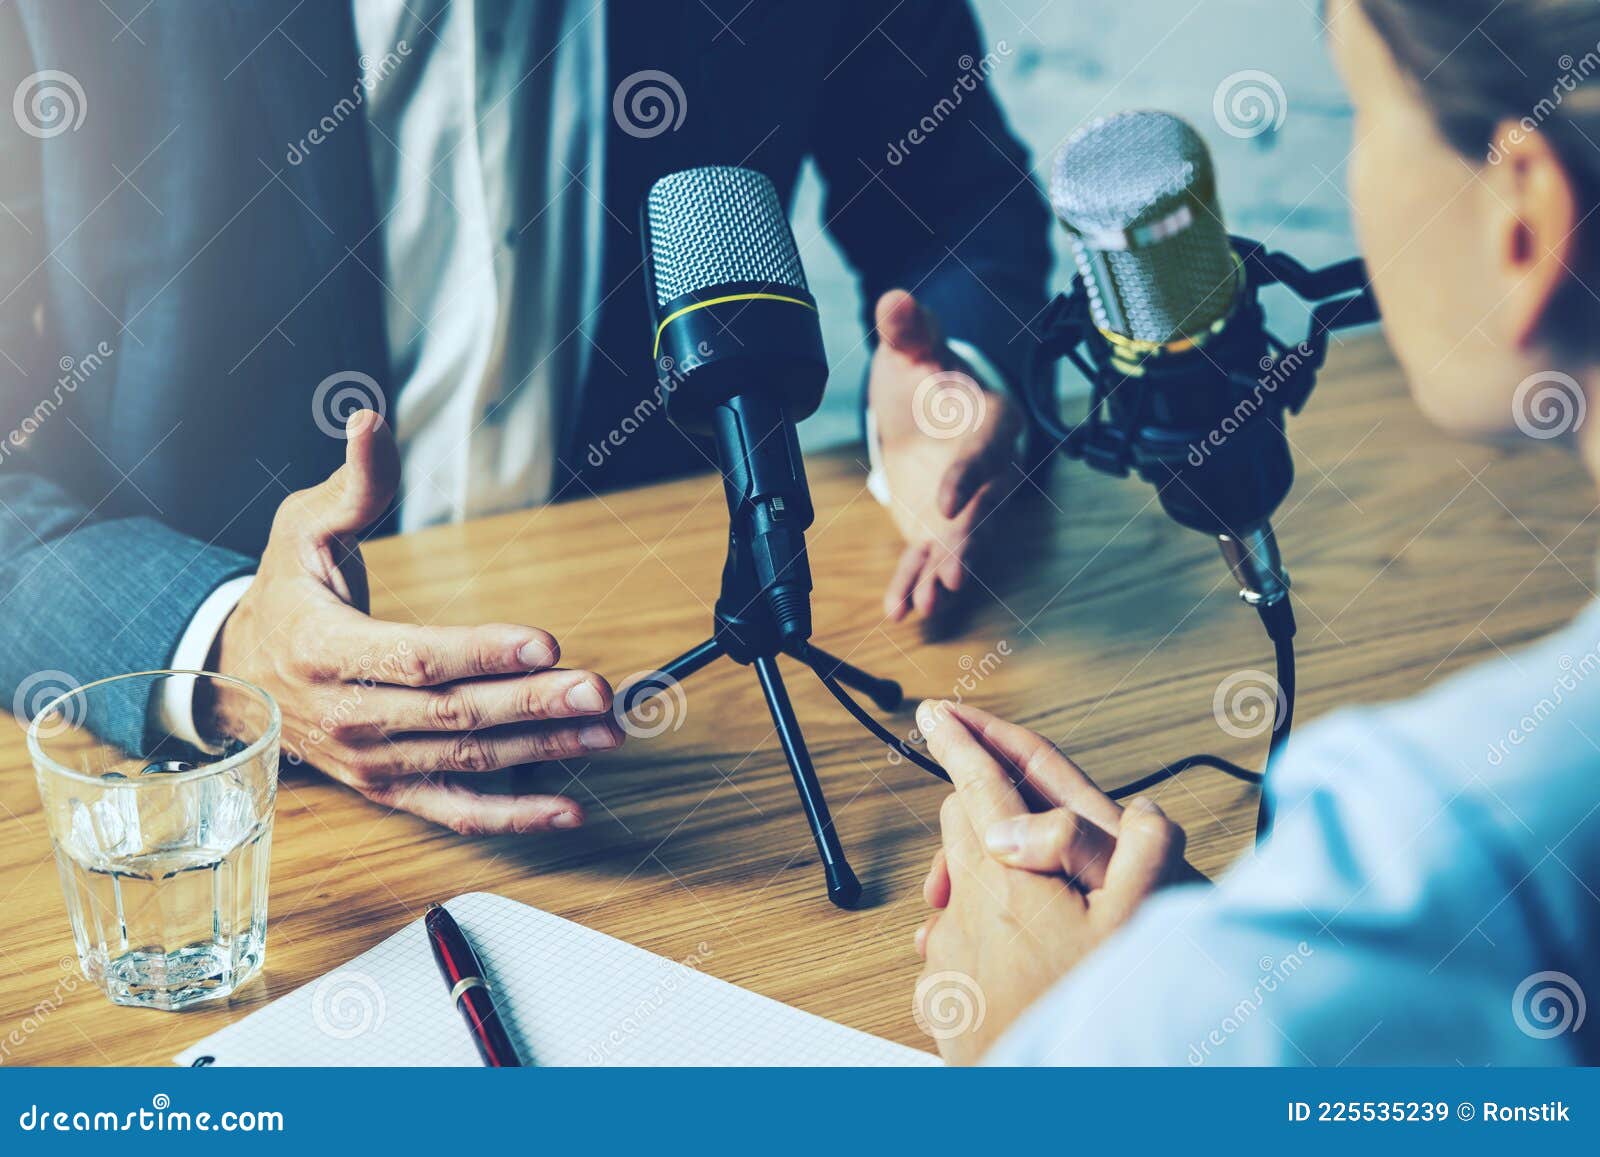 radio interview, podcast recording - business people talking in broadcasting studio